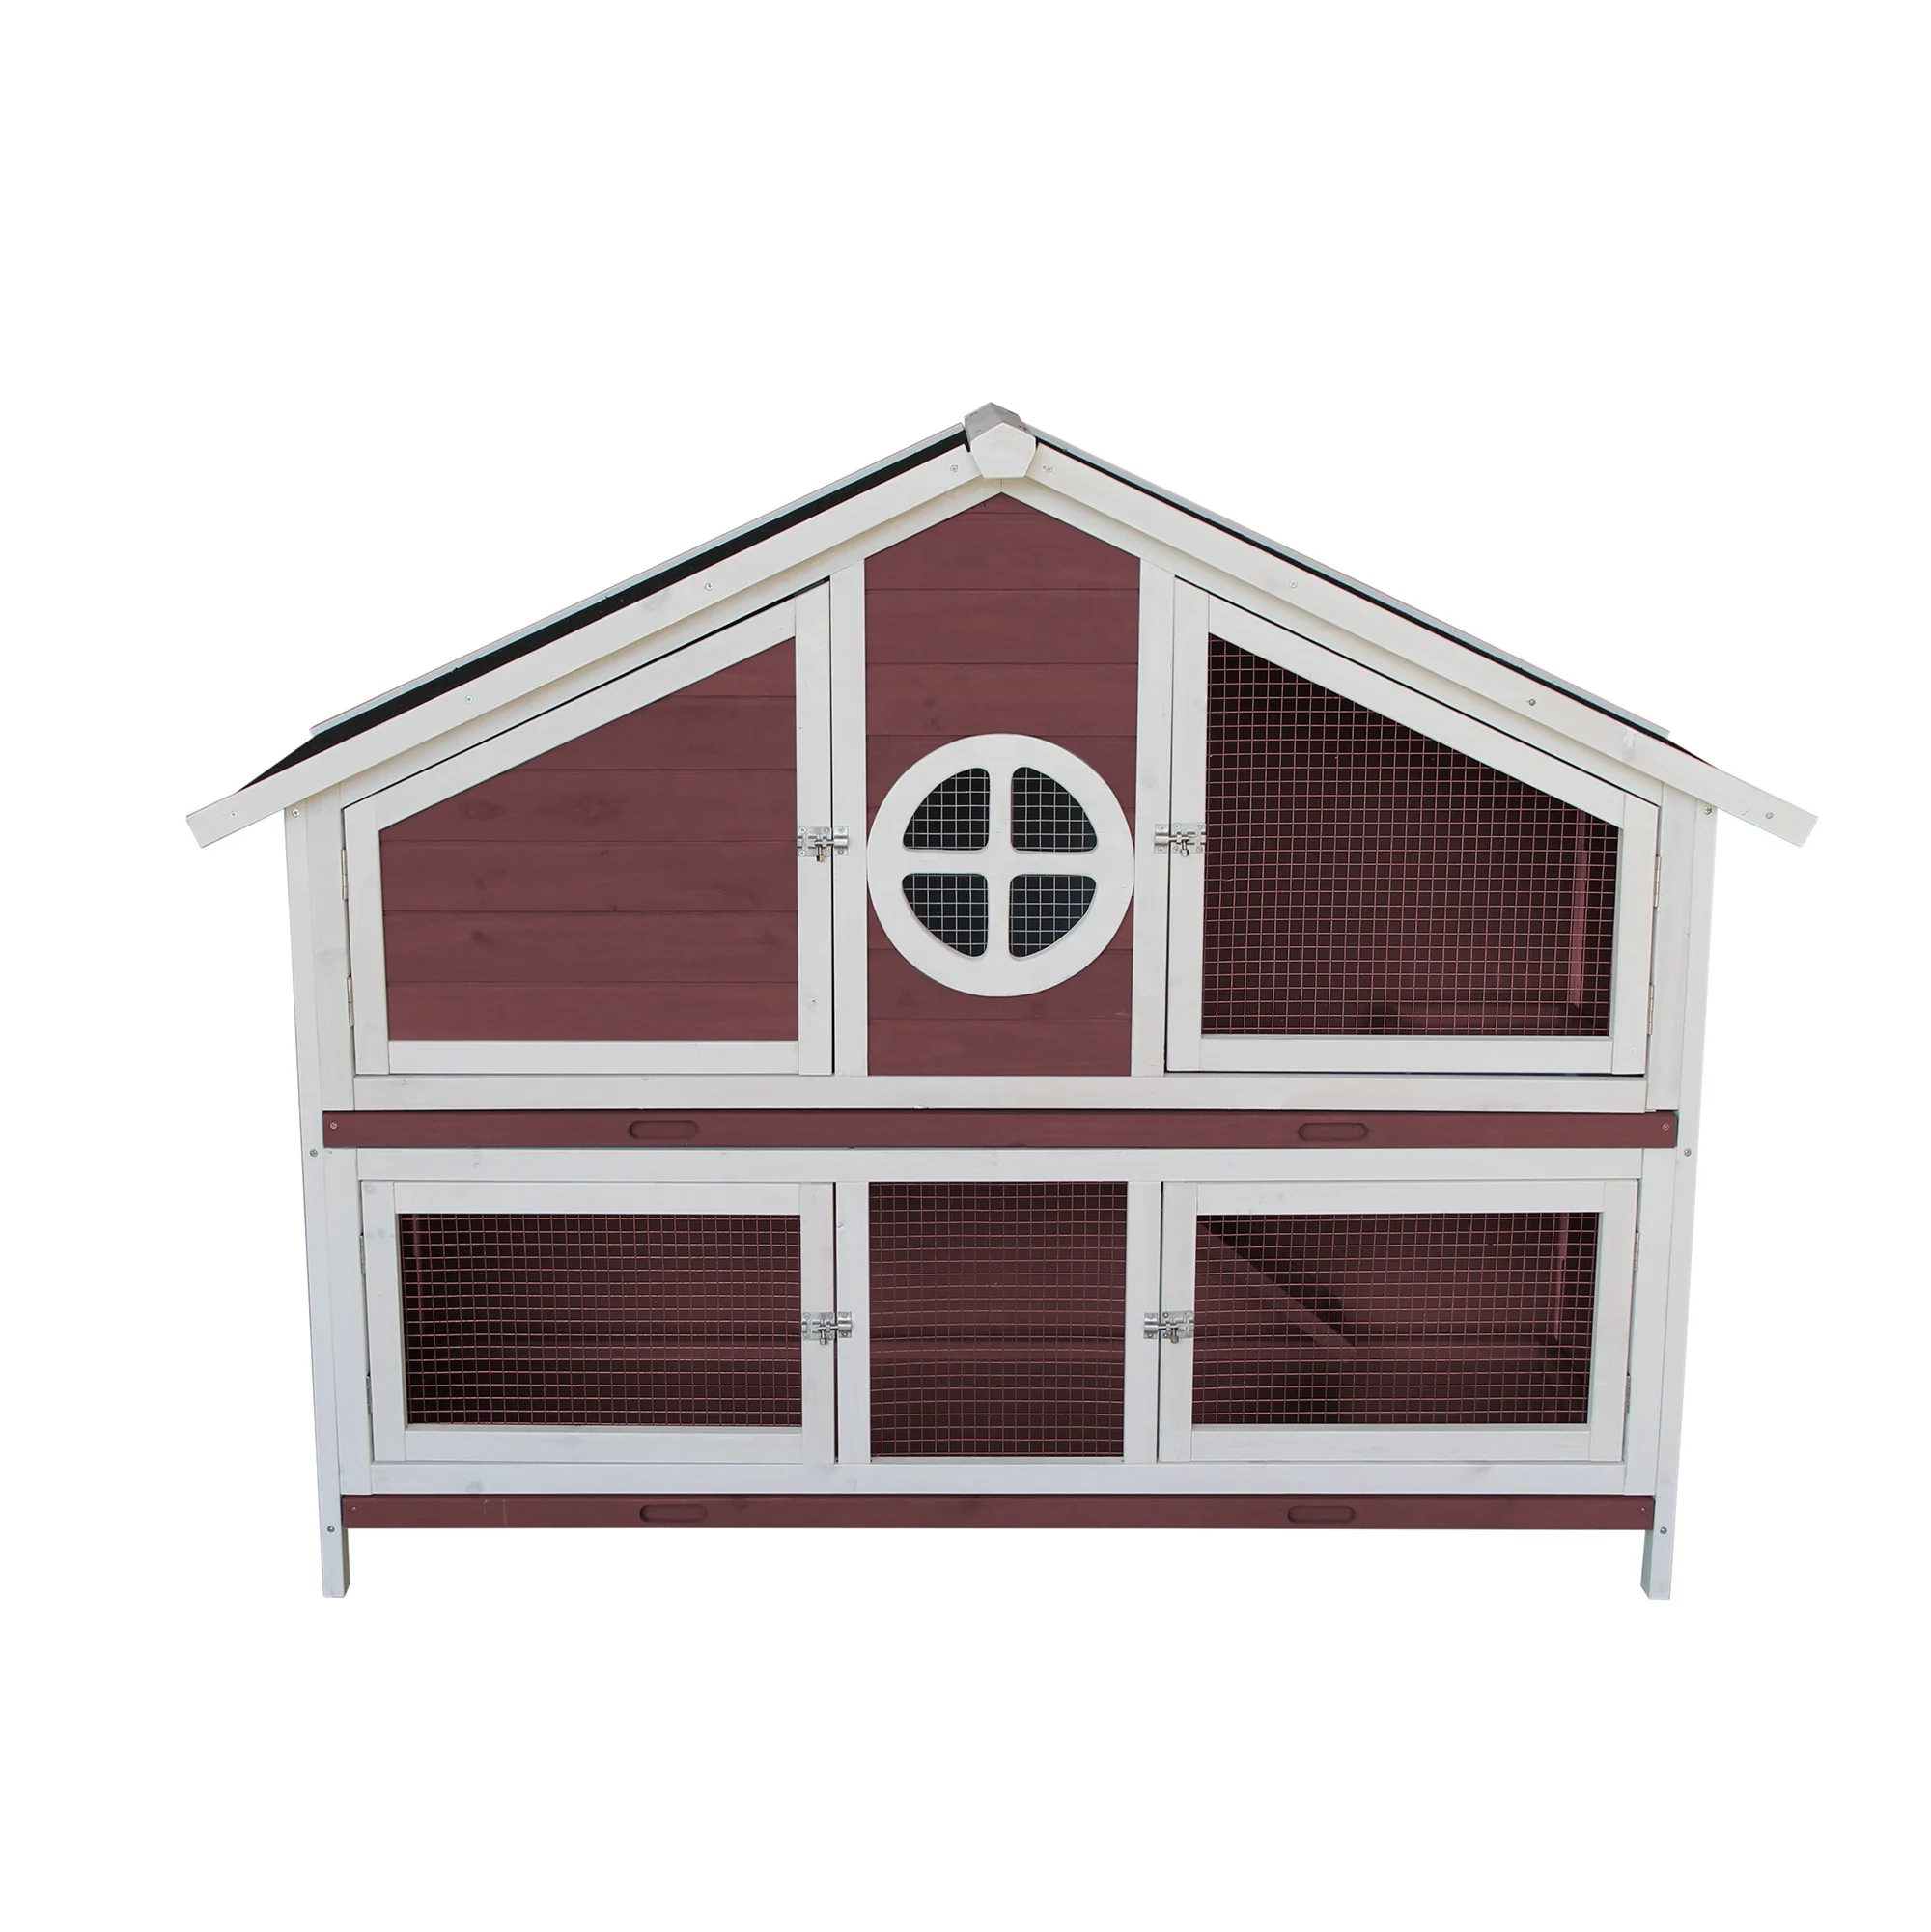 

China Flat Pack Rabbit Hutch Wooden Rabbit Cage Pet House for Rabbit living, Gray and red